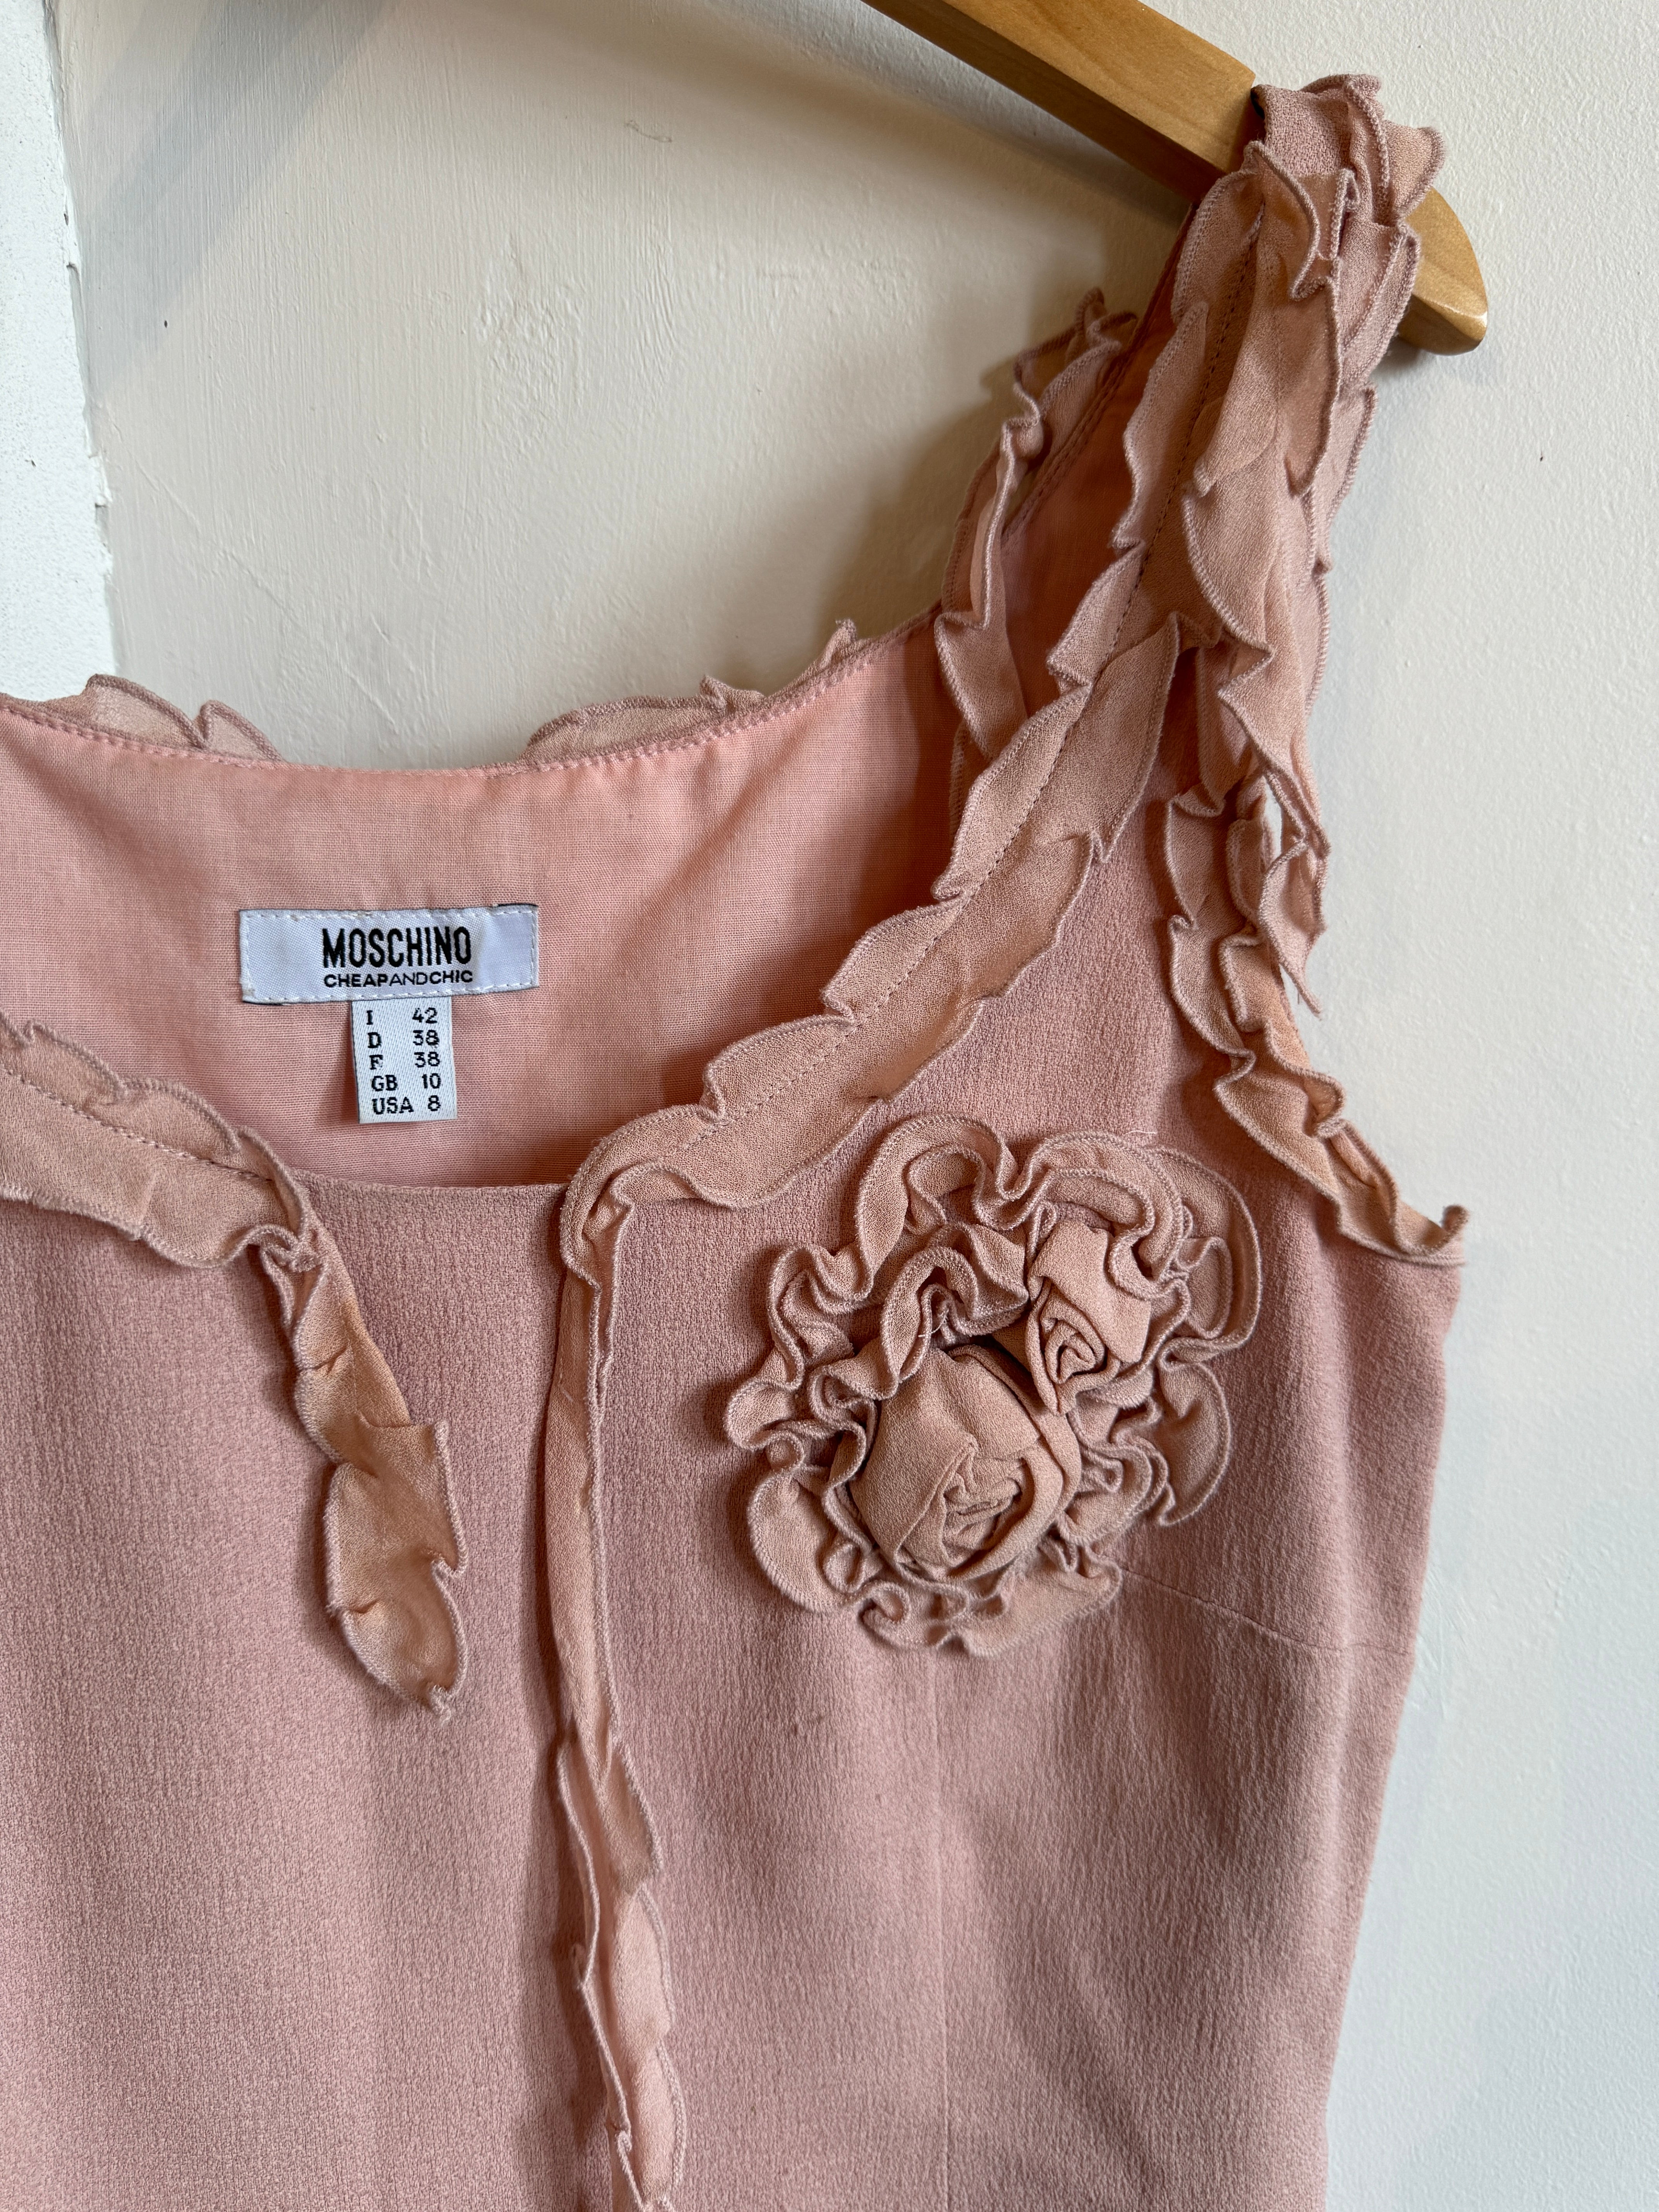 Vintage 90s Moschino Dusty Pink Rosette Top